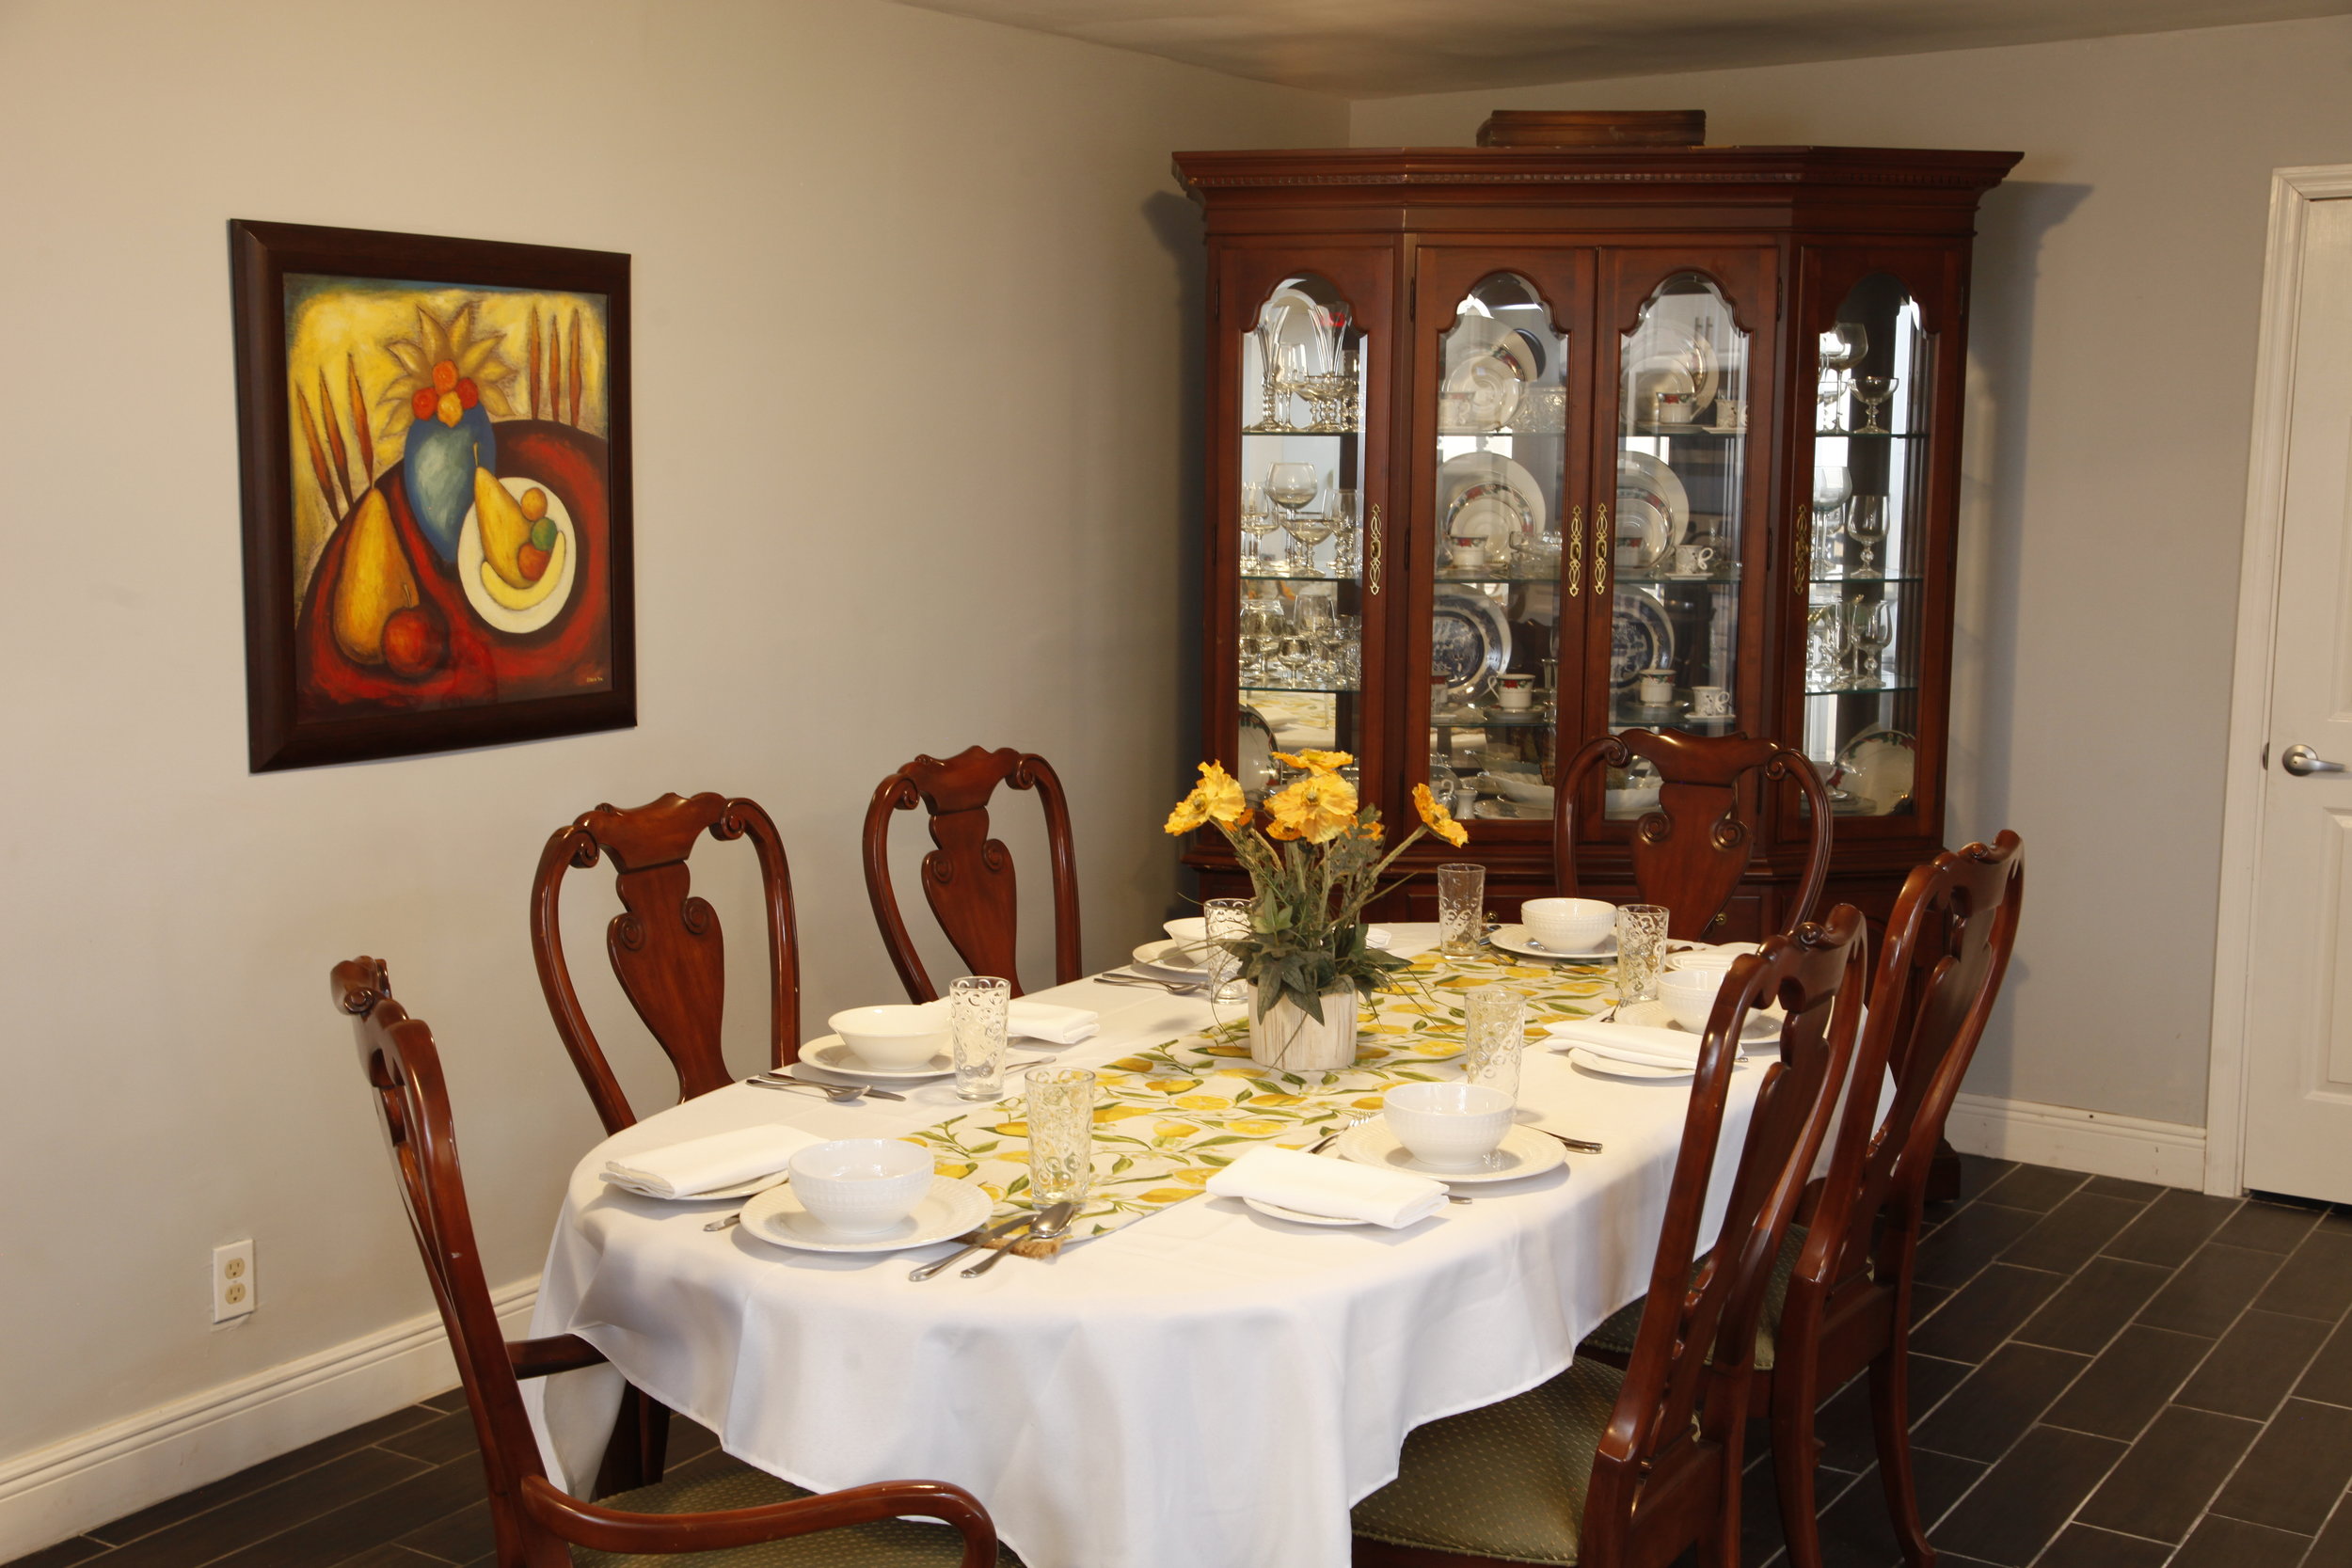  Our mahogany dining area seats all 6 residents, ensuring everyone can experience family dining at the Pearl House! 